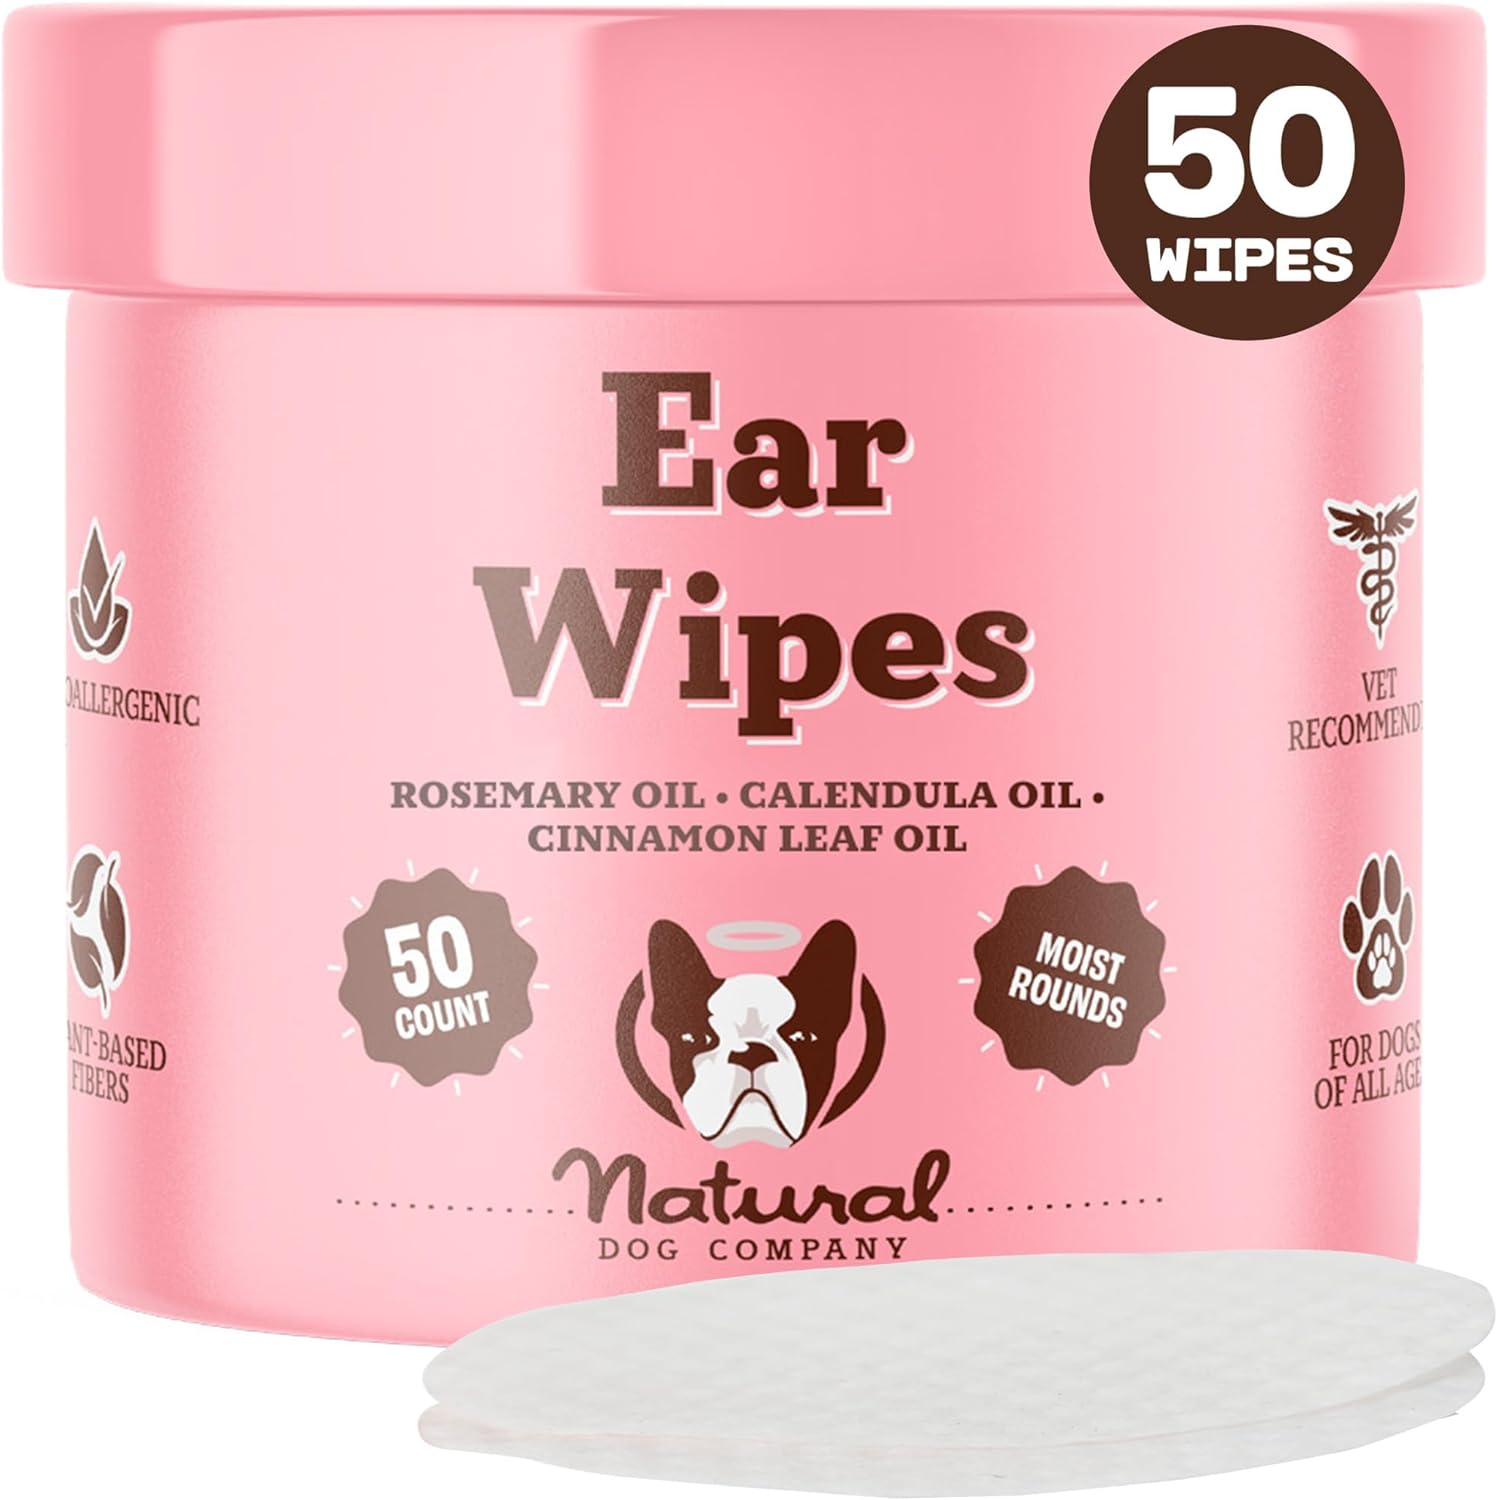 Natural Dog Ear Wipes (50 Ct) Essential Oil Infused Hygenic Dog Ear Cleanser for Dogs, Reduces Odor, Soothing Calendula, Aloe Vera, Witch Hazel, Dog Ear Itch Relief, Vegan